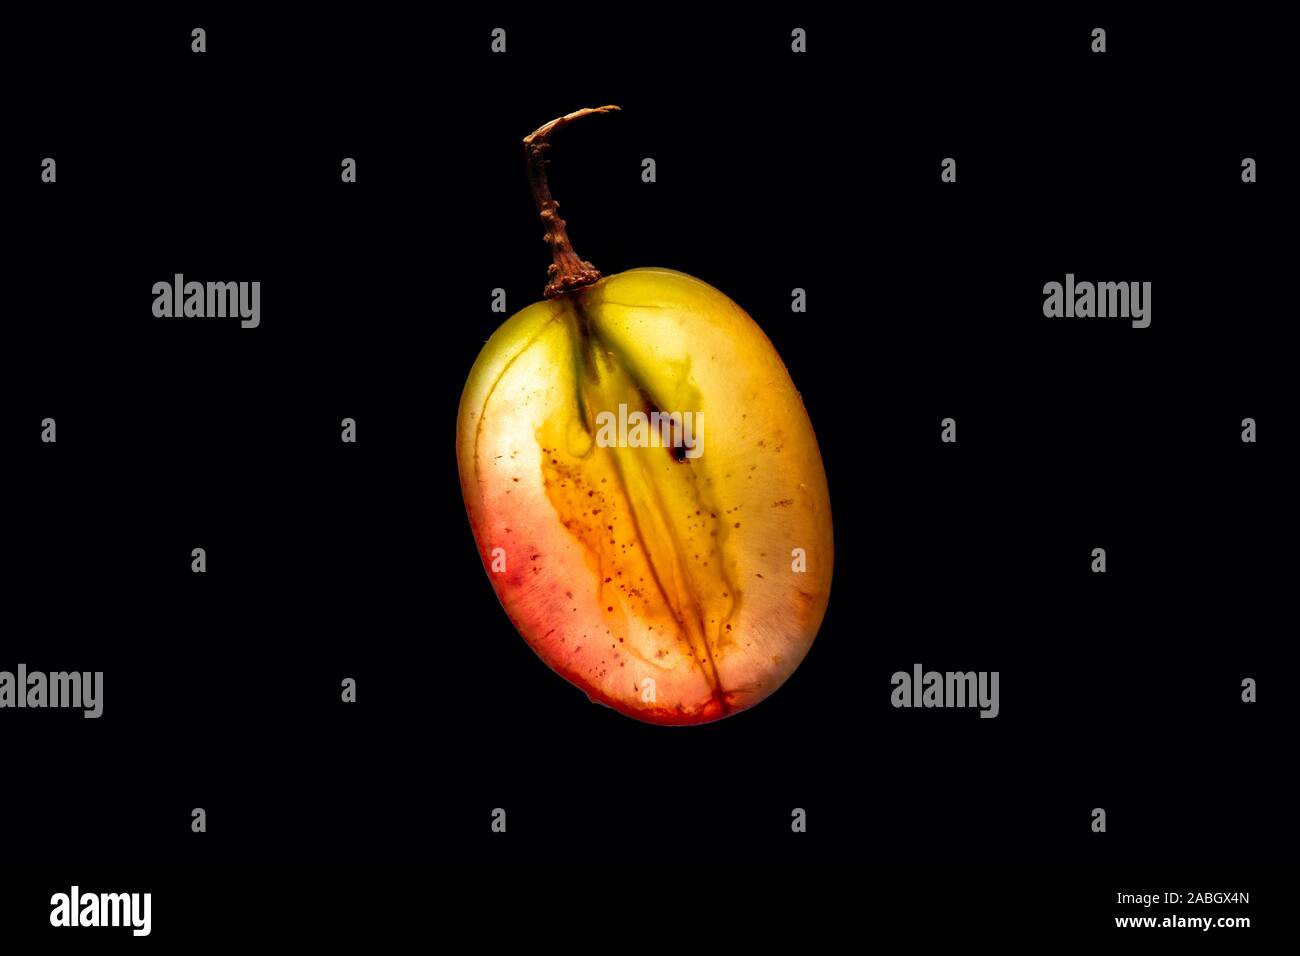 Sliced Grape with Backlight Isolated on Black Background Stock Photo